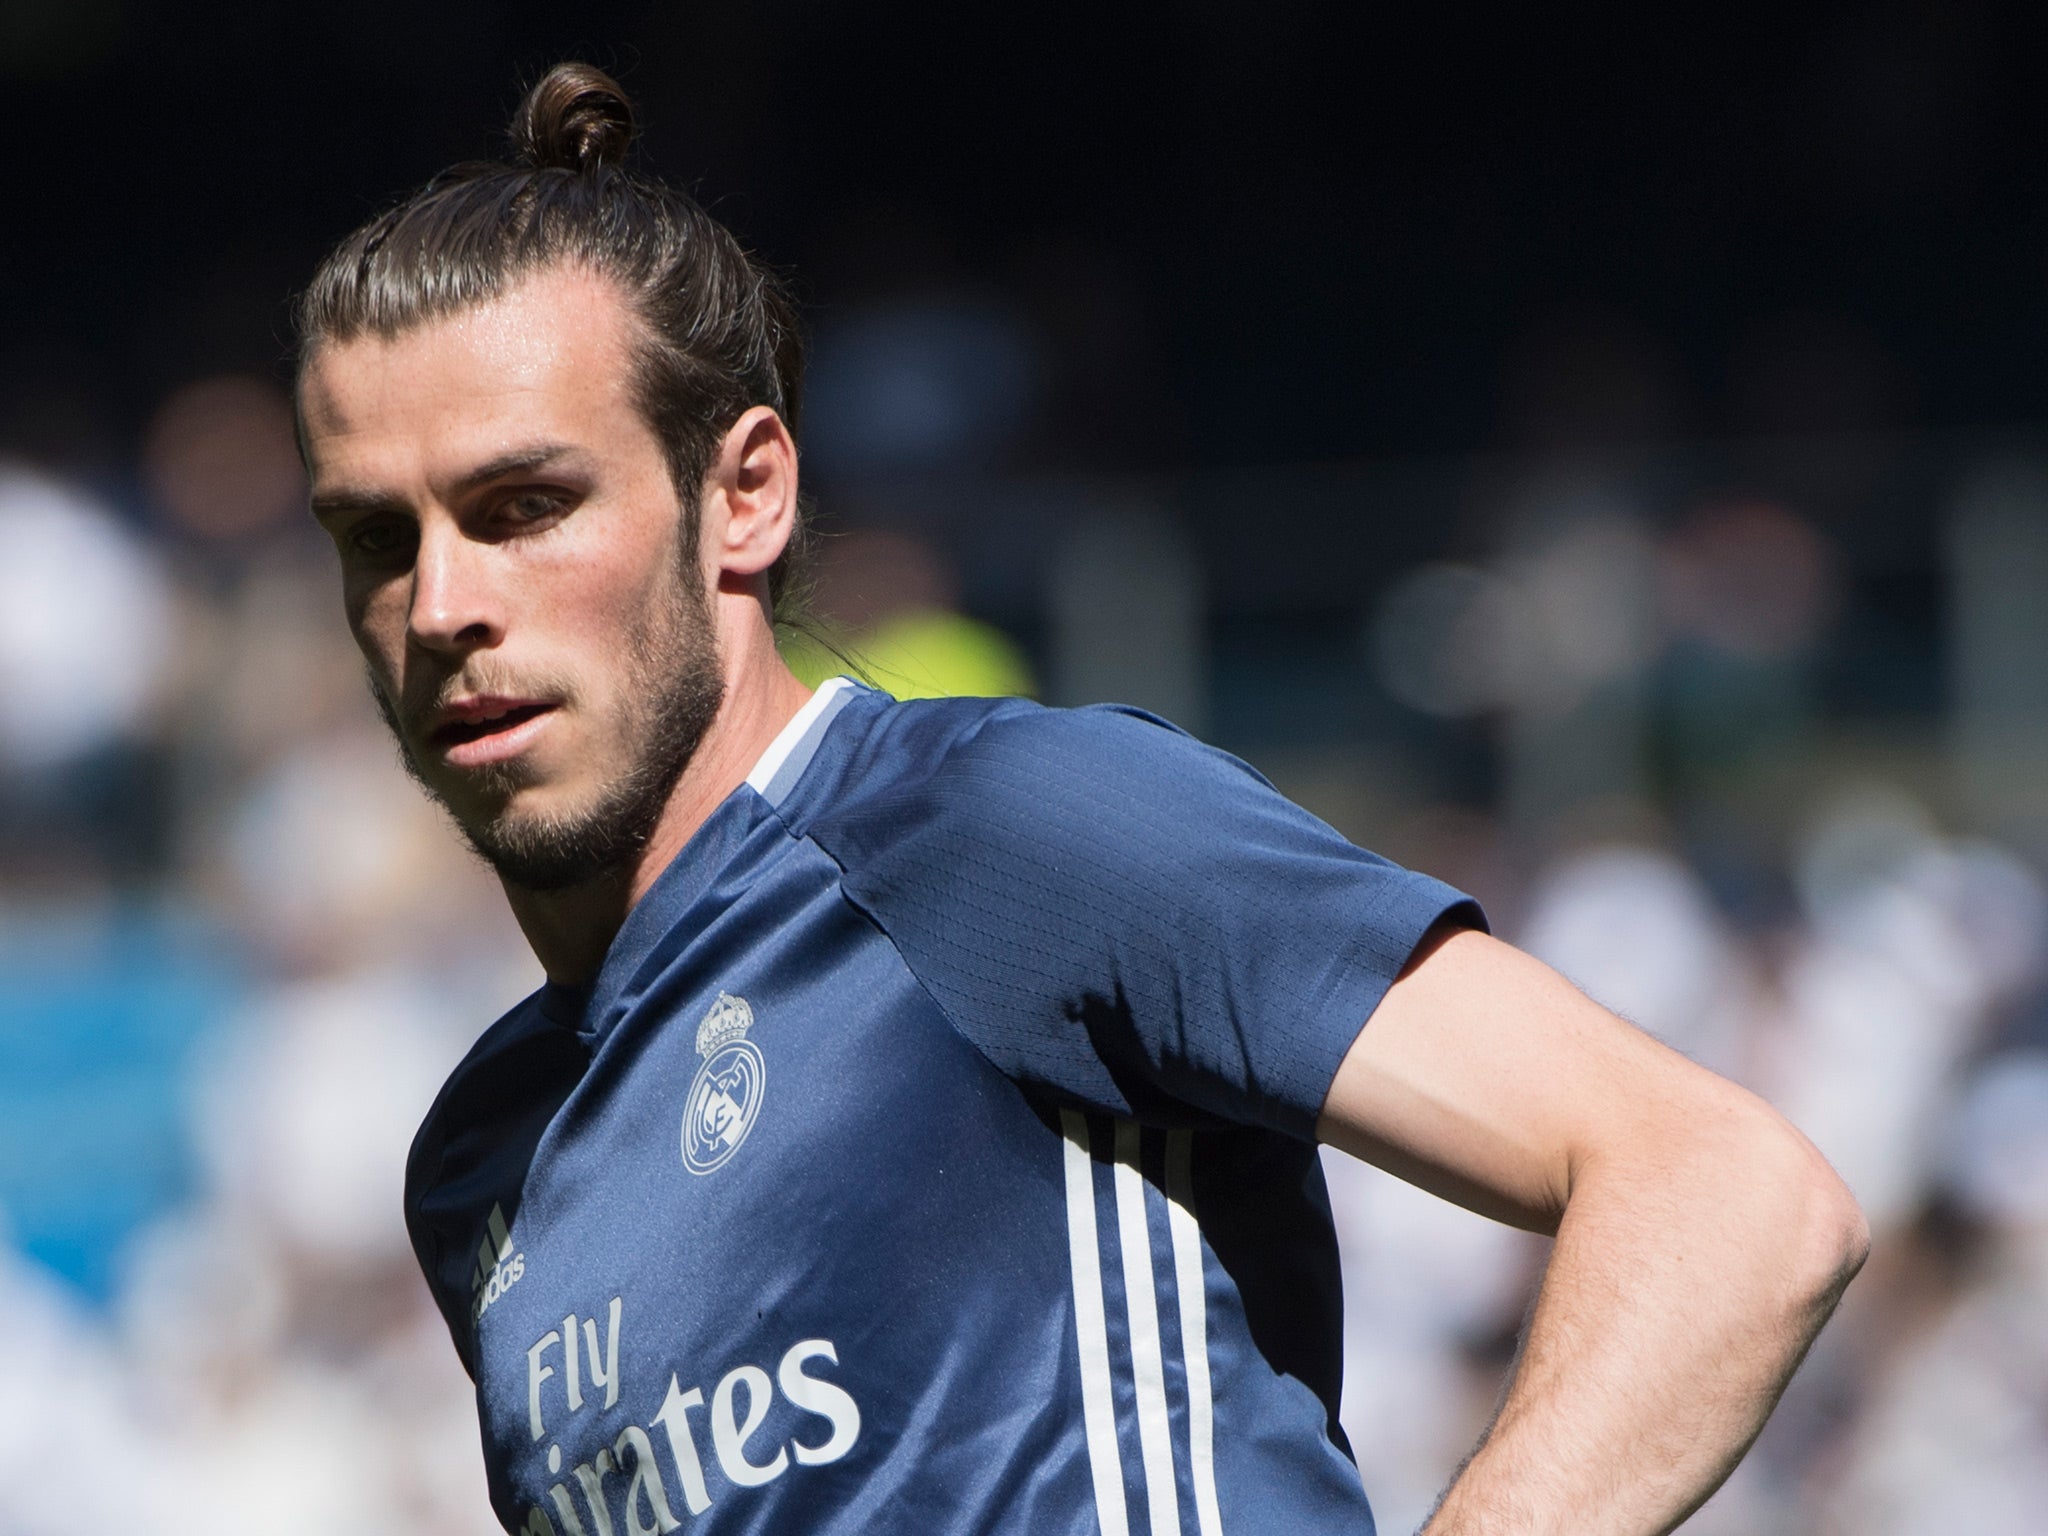 Gareth Bale missed Tuesday's controversial Champions League quarter-final against Bayern Munich